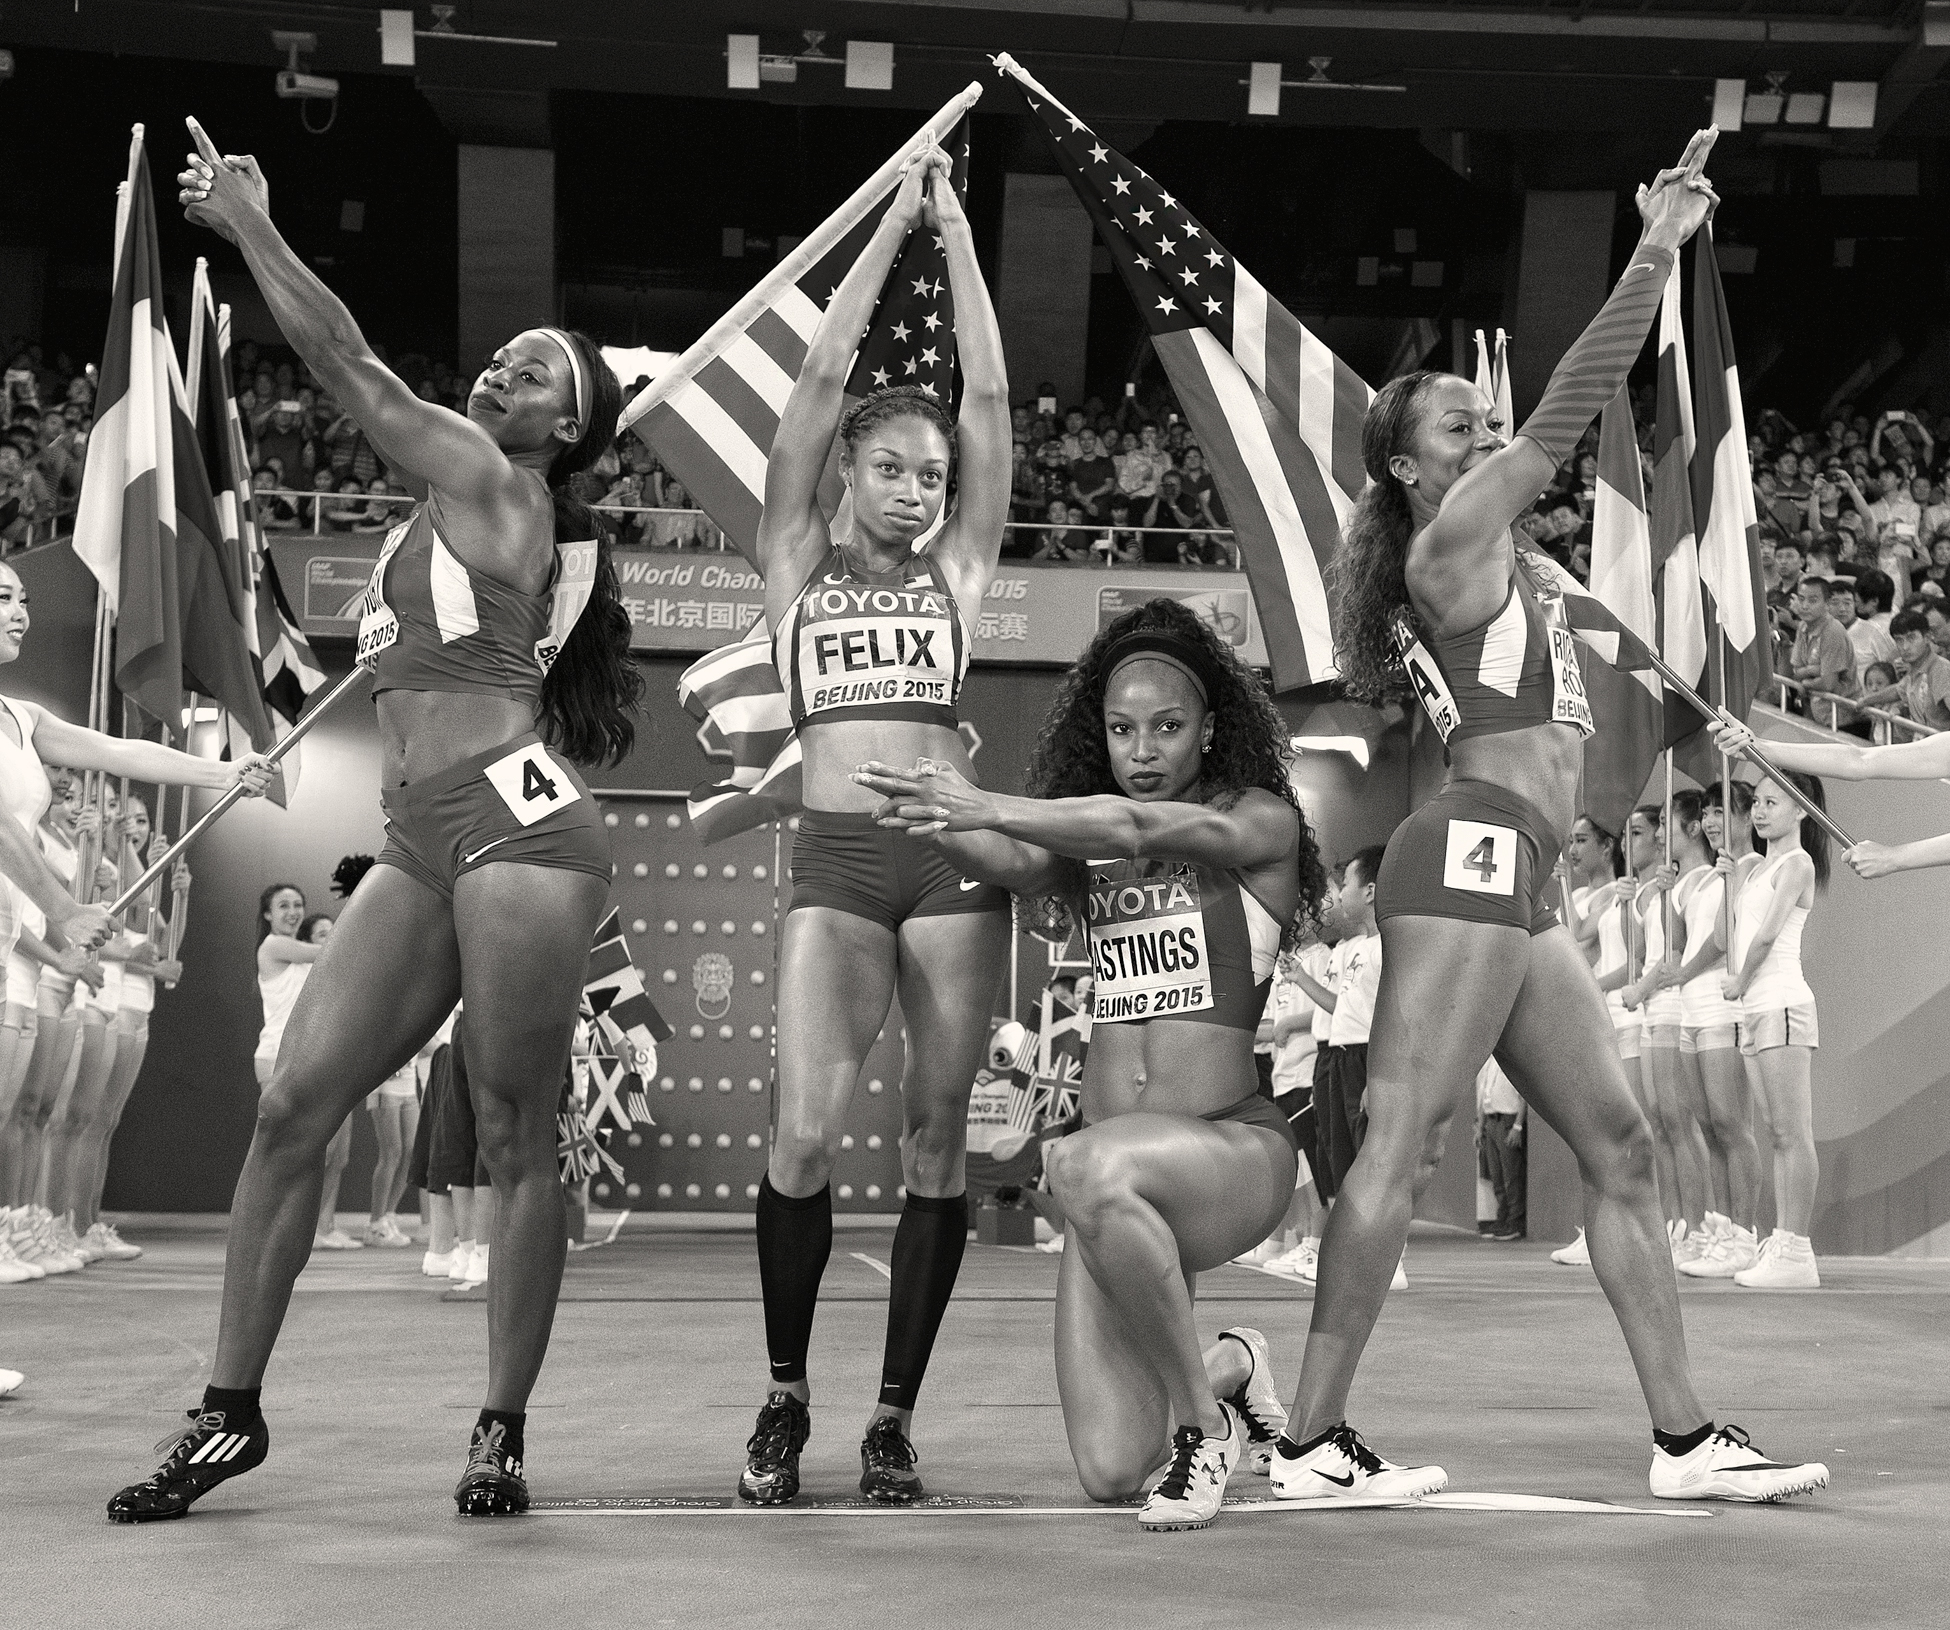 Gallery: Jeff Cohen – Track and Field Photography